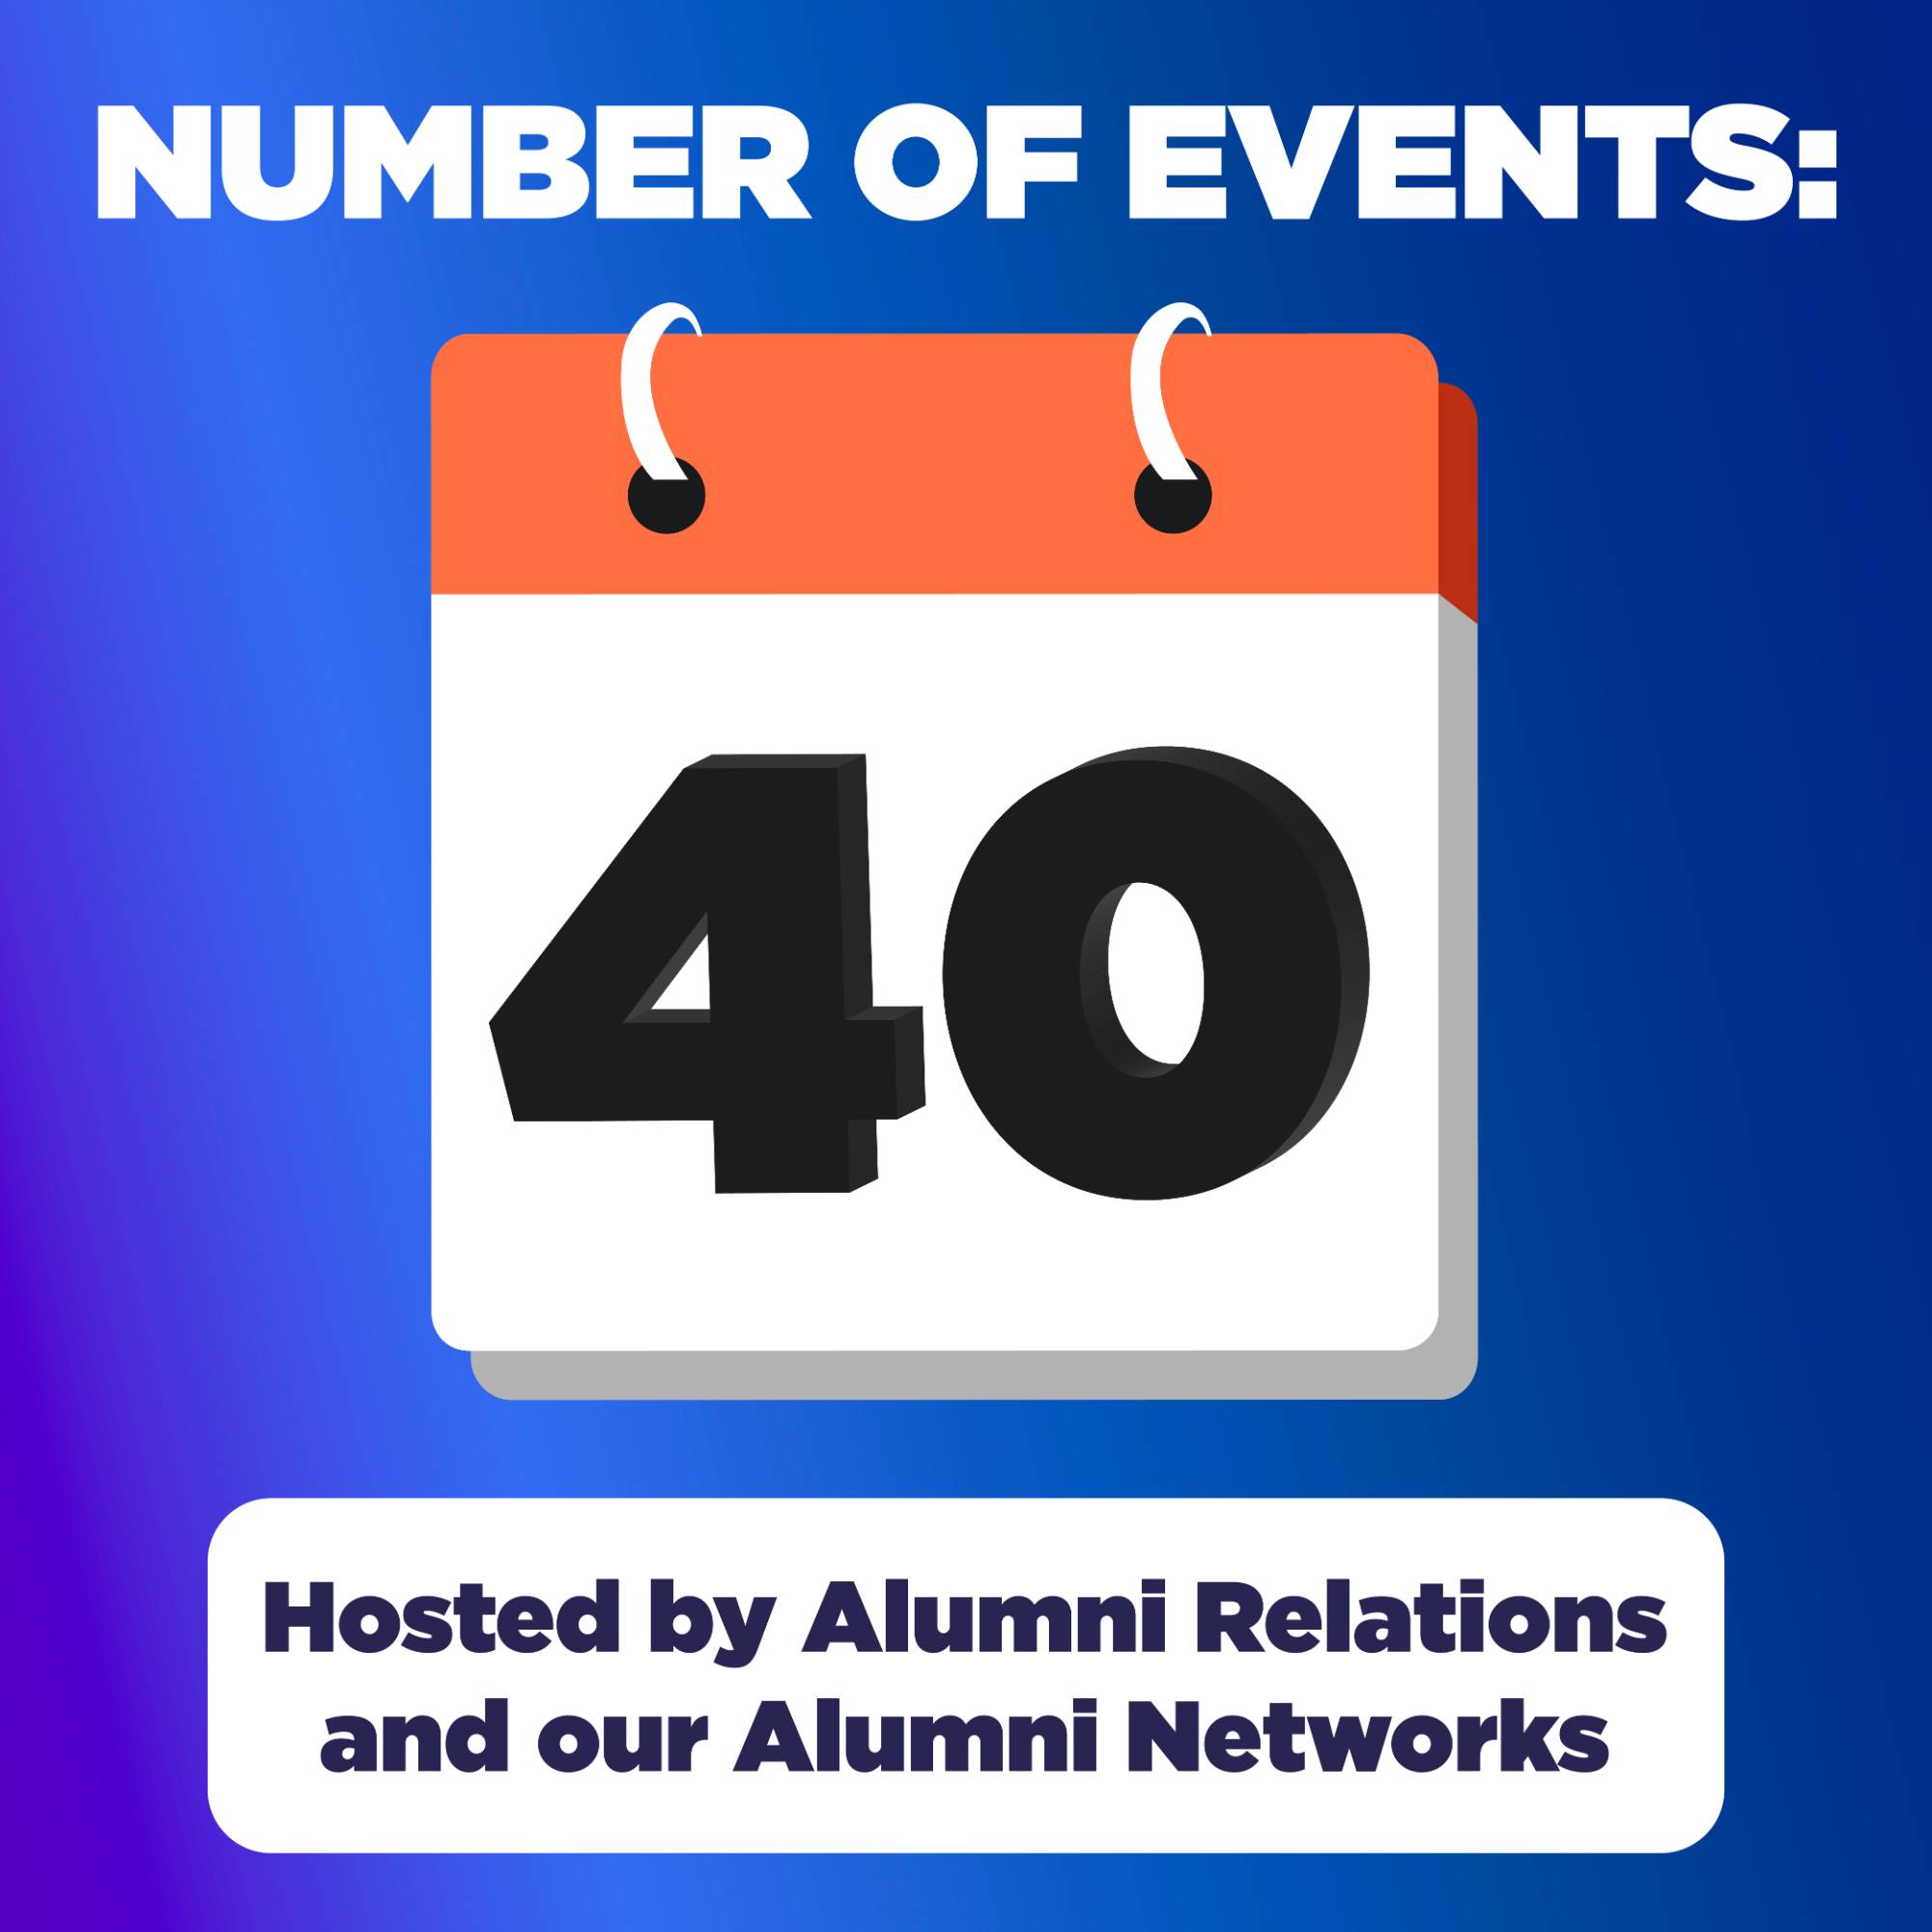 The Alumni Relations office and our Alumni Networks hosted 40 events over the past year.